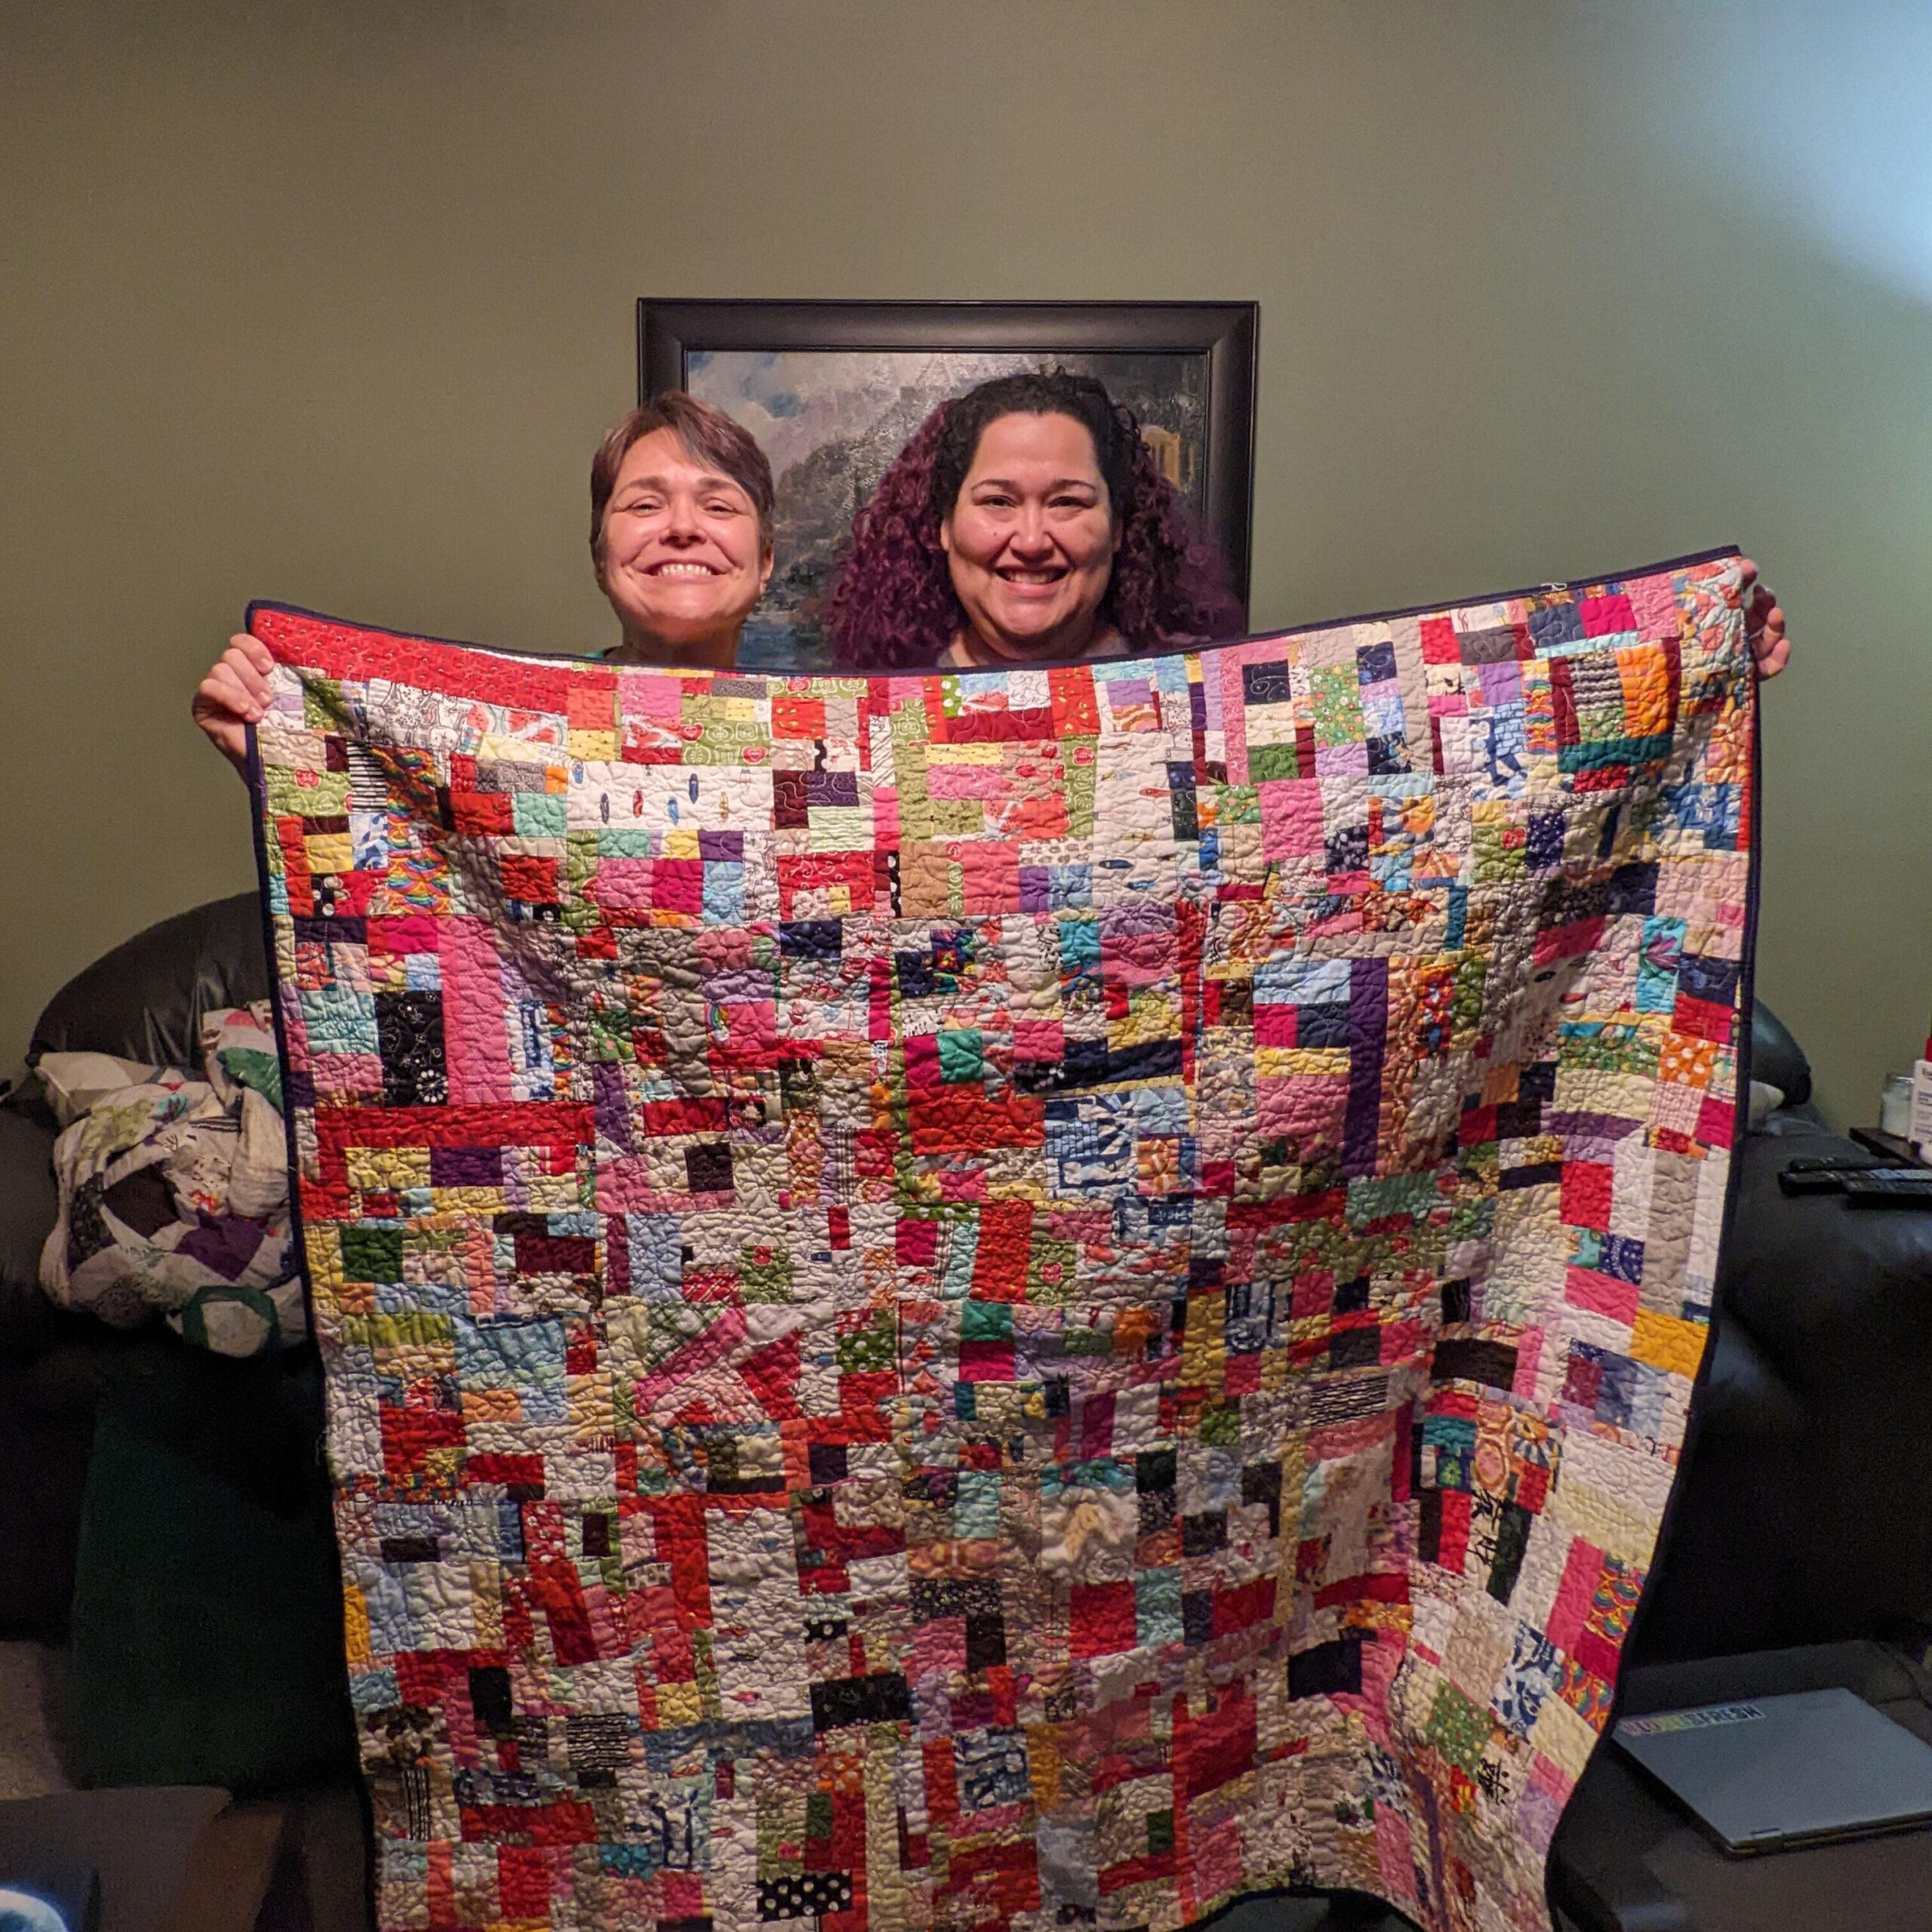 My friend and I holding up the finished crumb quilt in front of us.